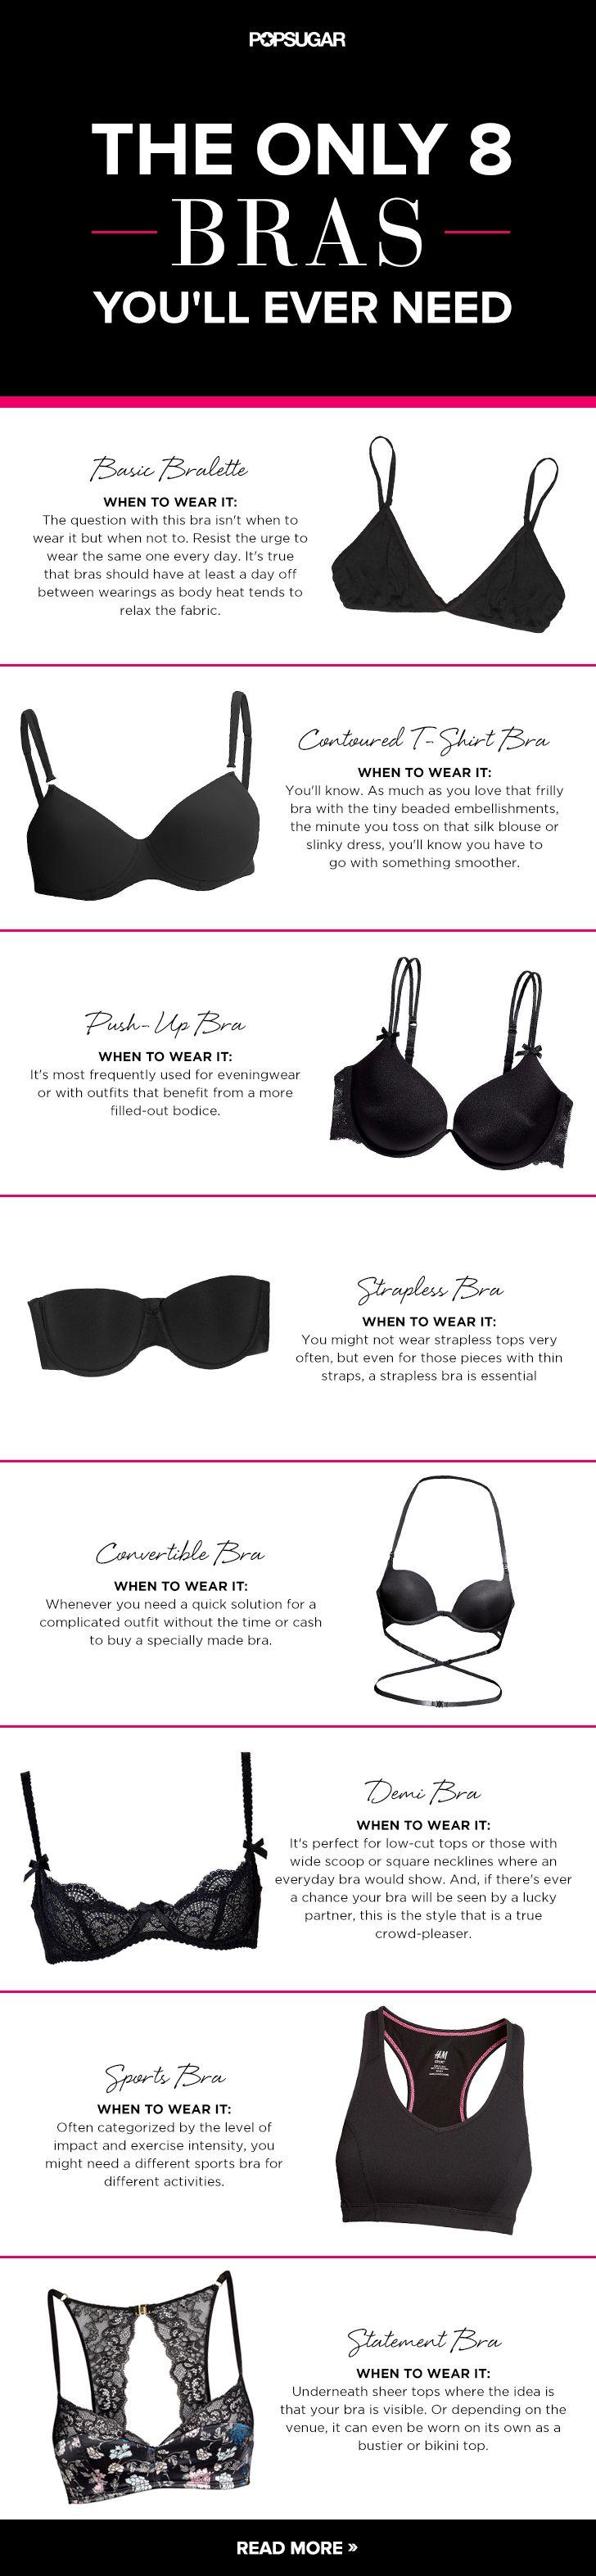 Wedding - The Only 8 Bras You'll Ever Need